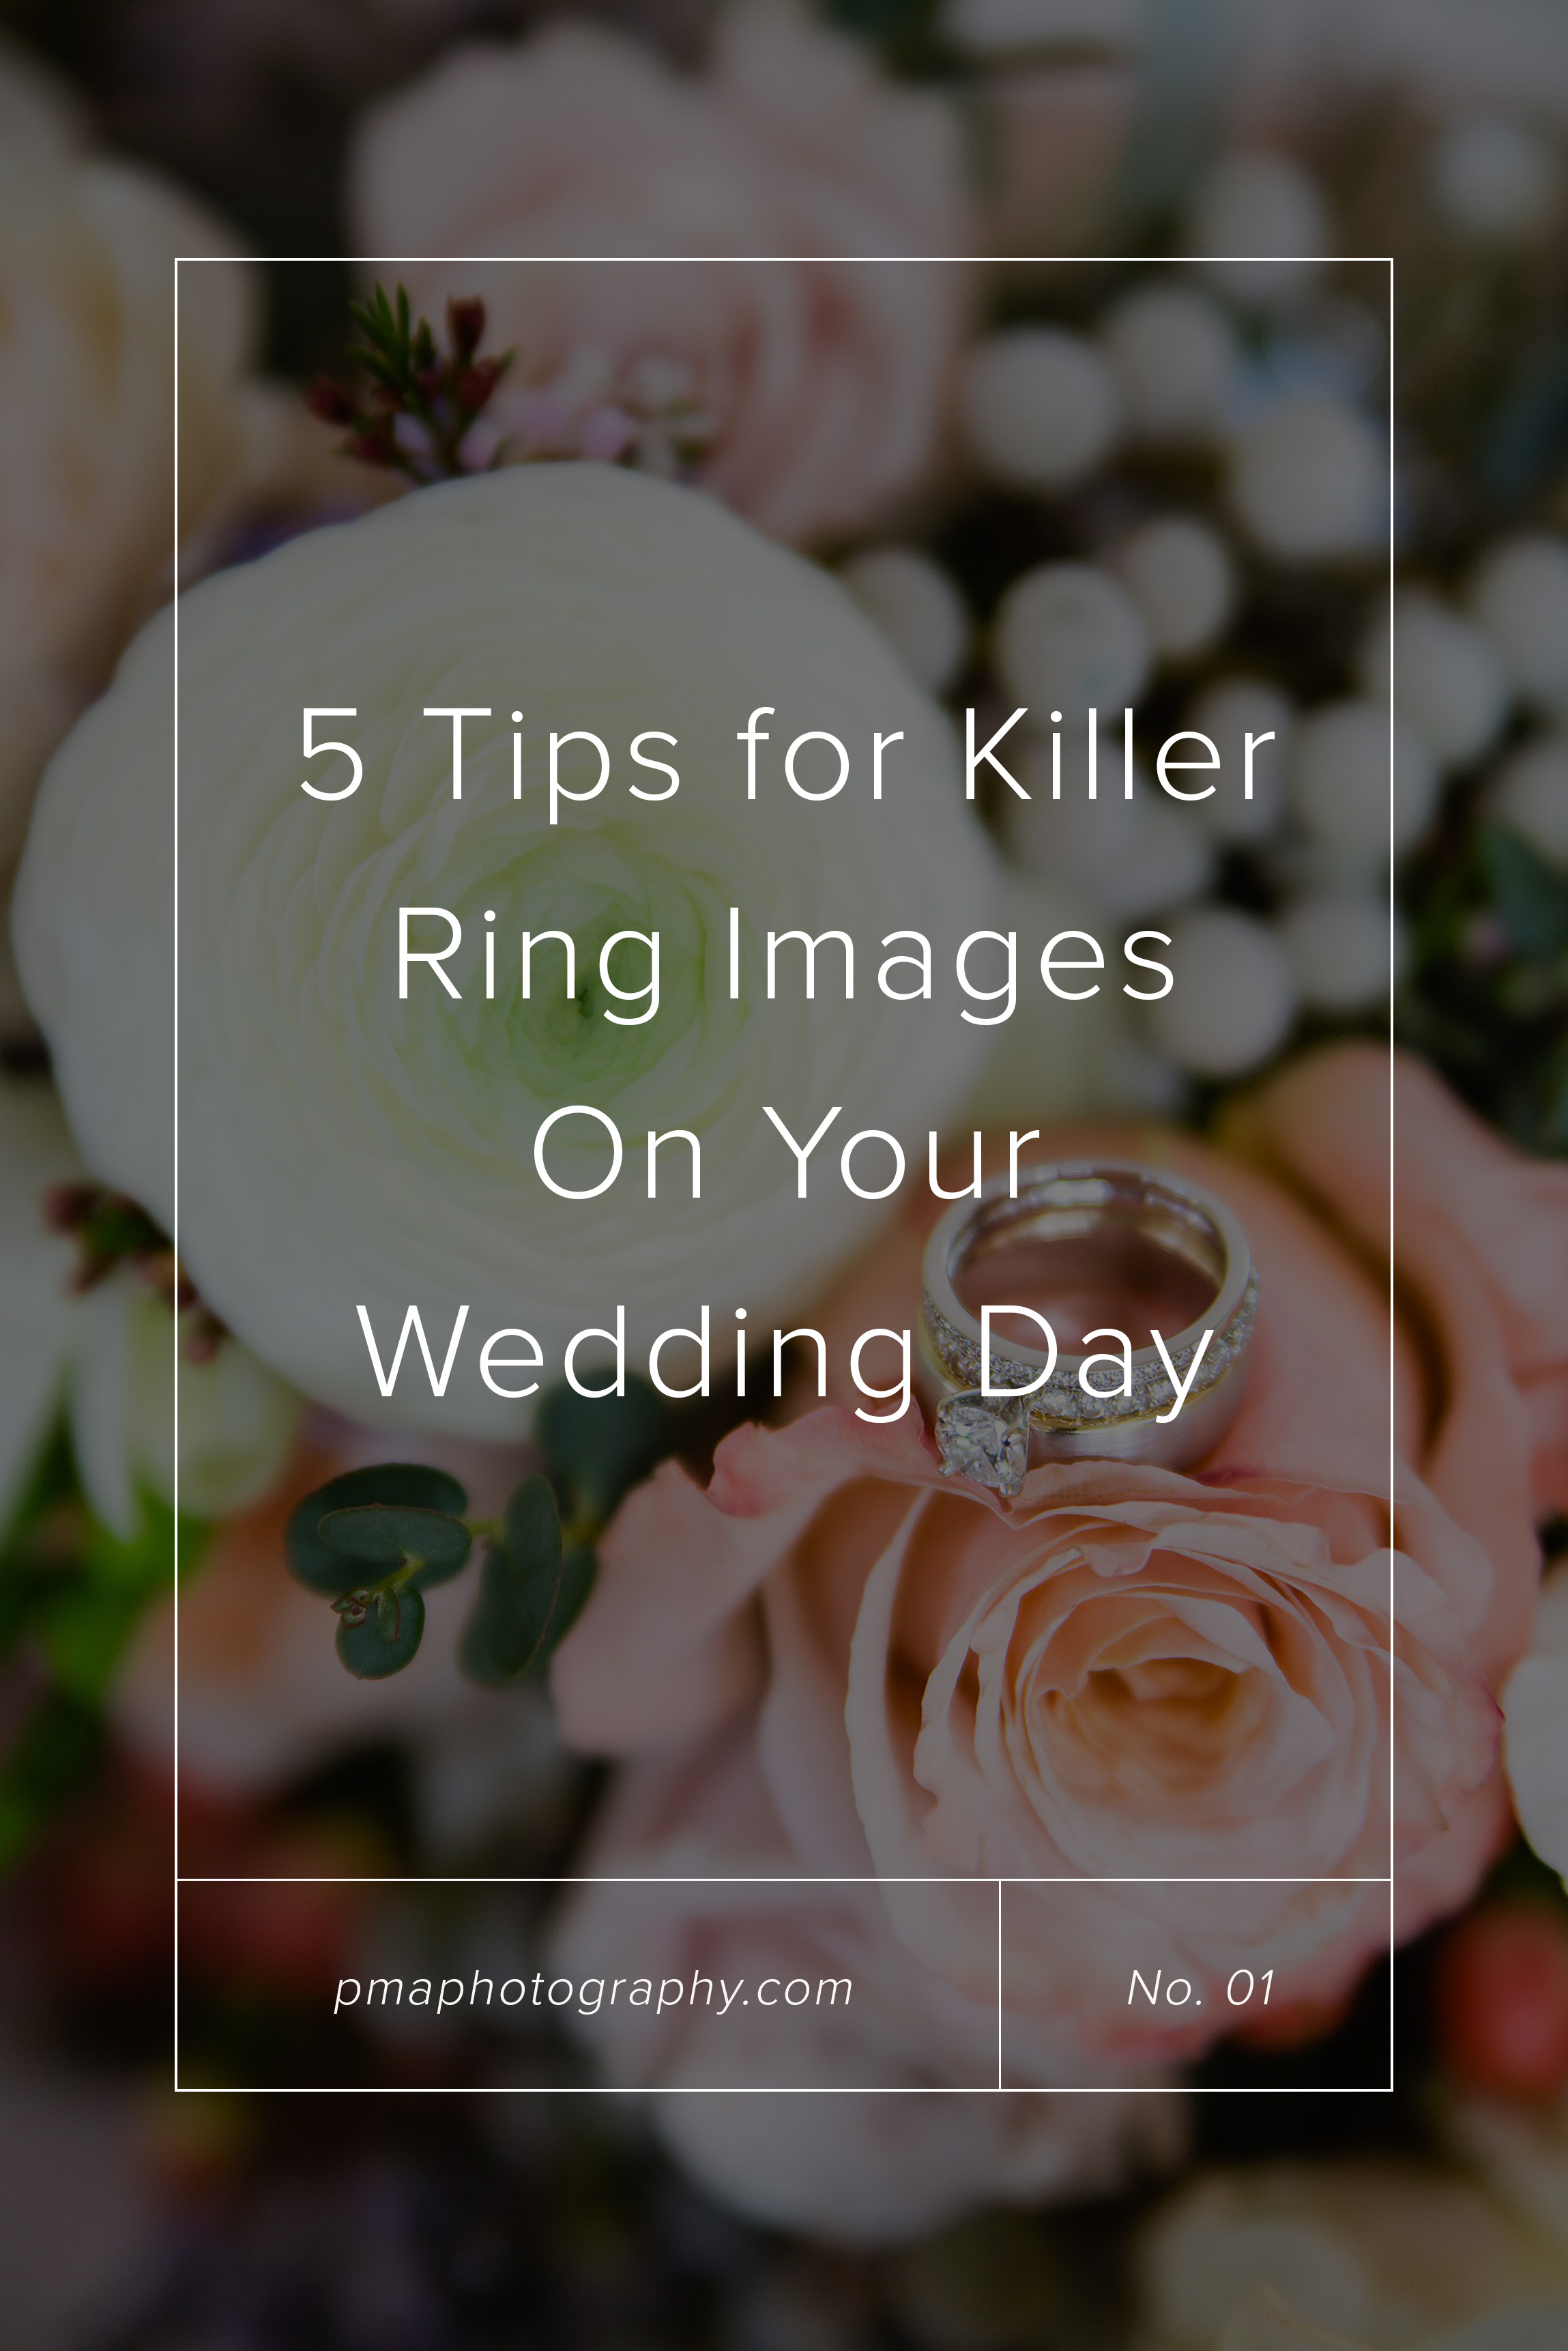 5 tips for killer ring images on your wedding day by PMA Photography.